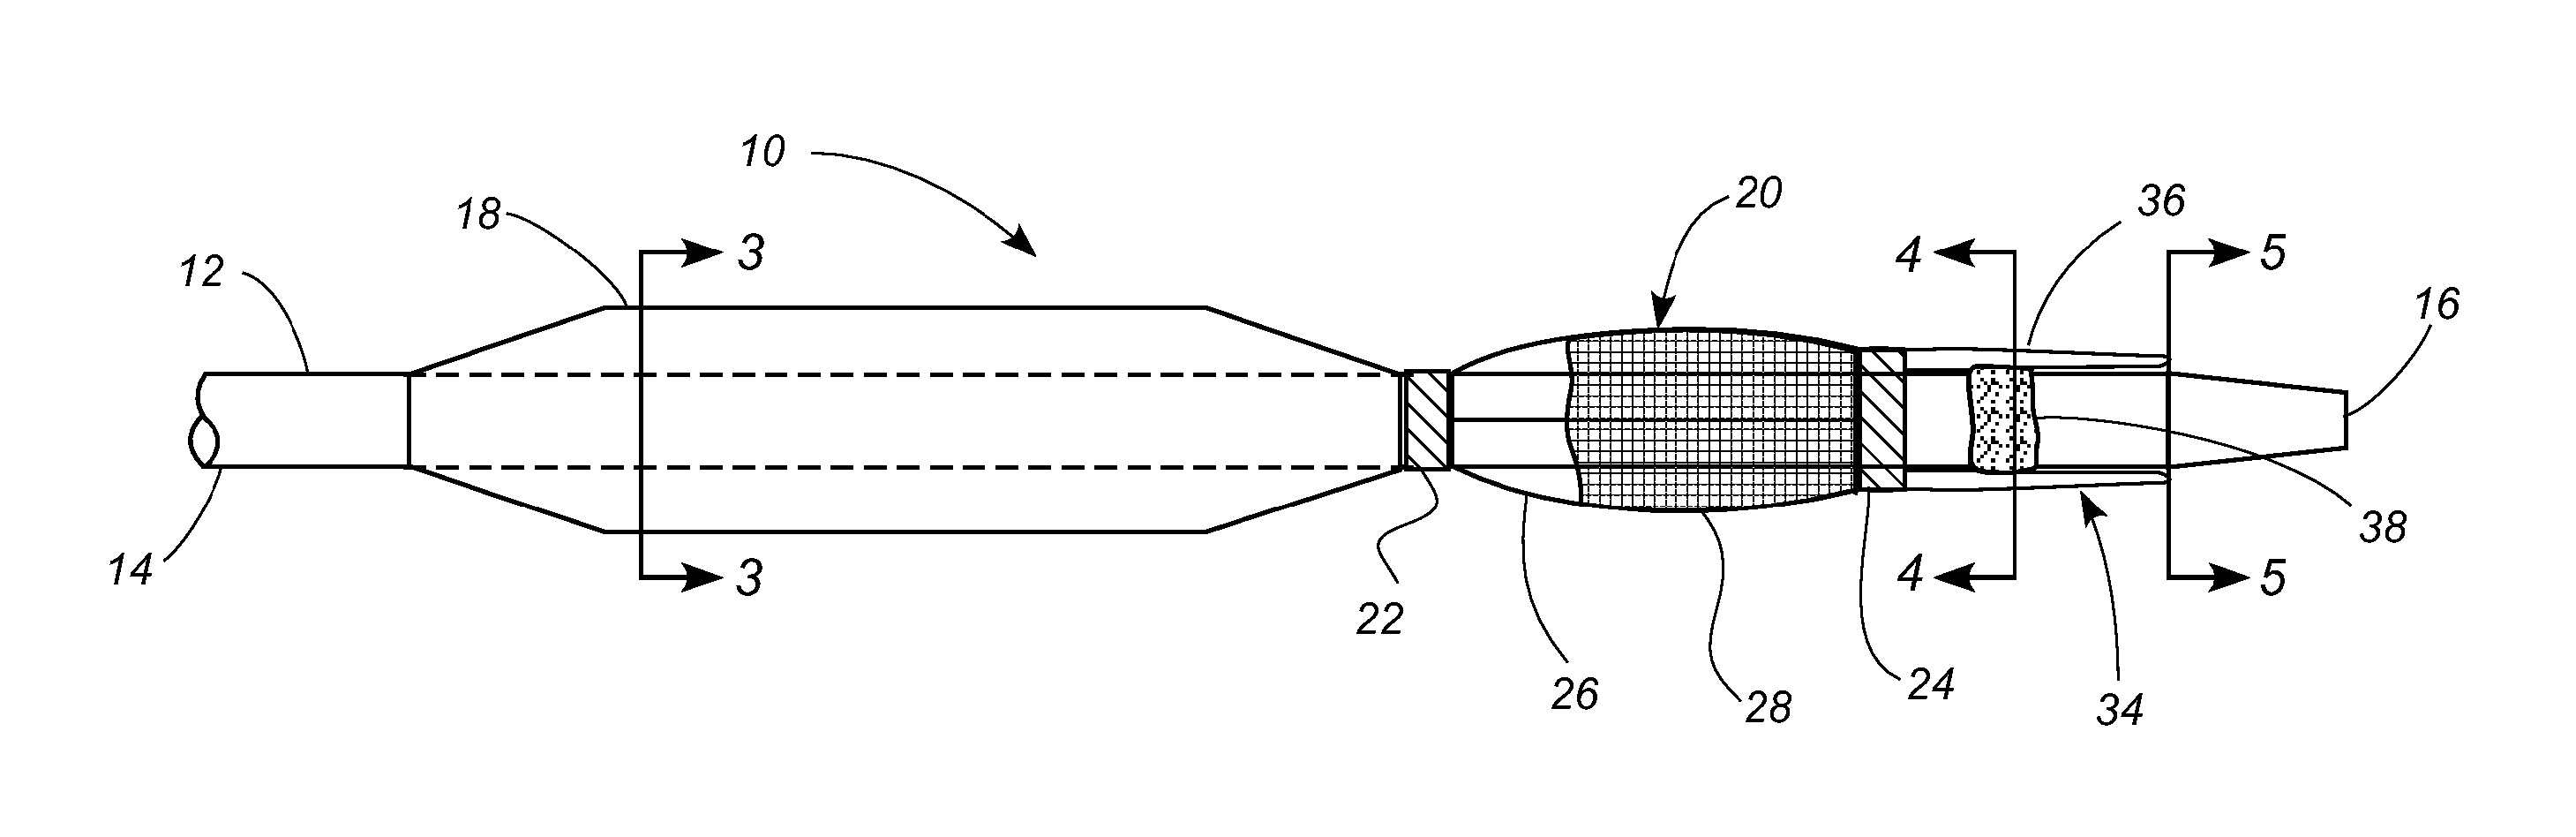 Percutaneous Transluminal Angioplasty Device With Integral Embolic Filter